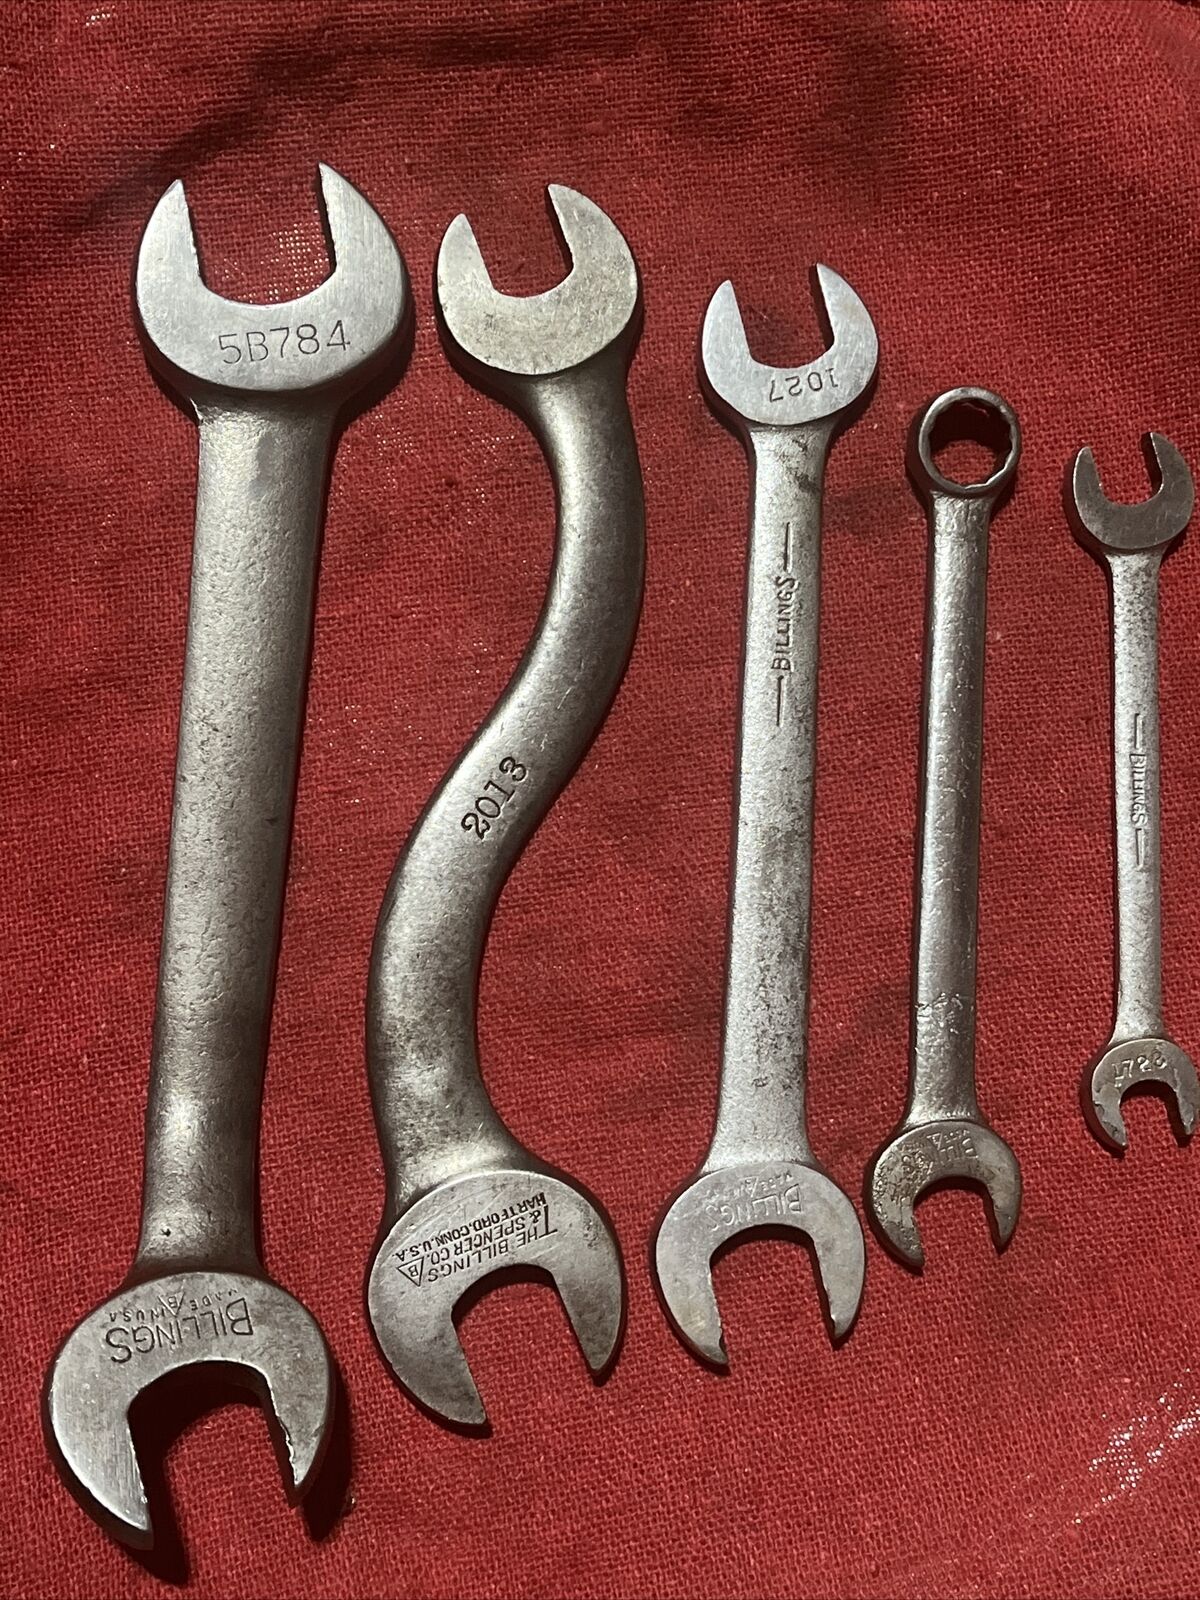 ****Updated 4 Added****Vintage Billings  Wrenches 5B784, 2013, 1027, 1162, 1723